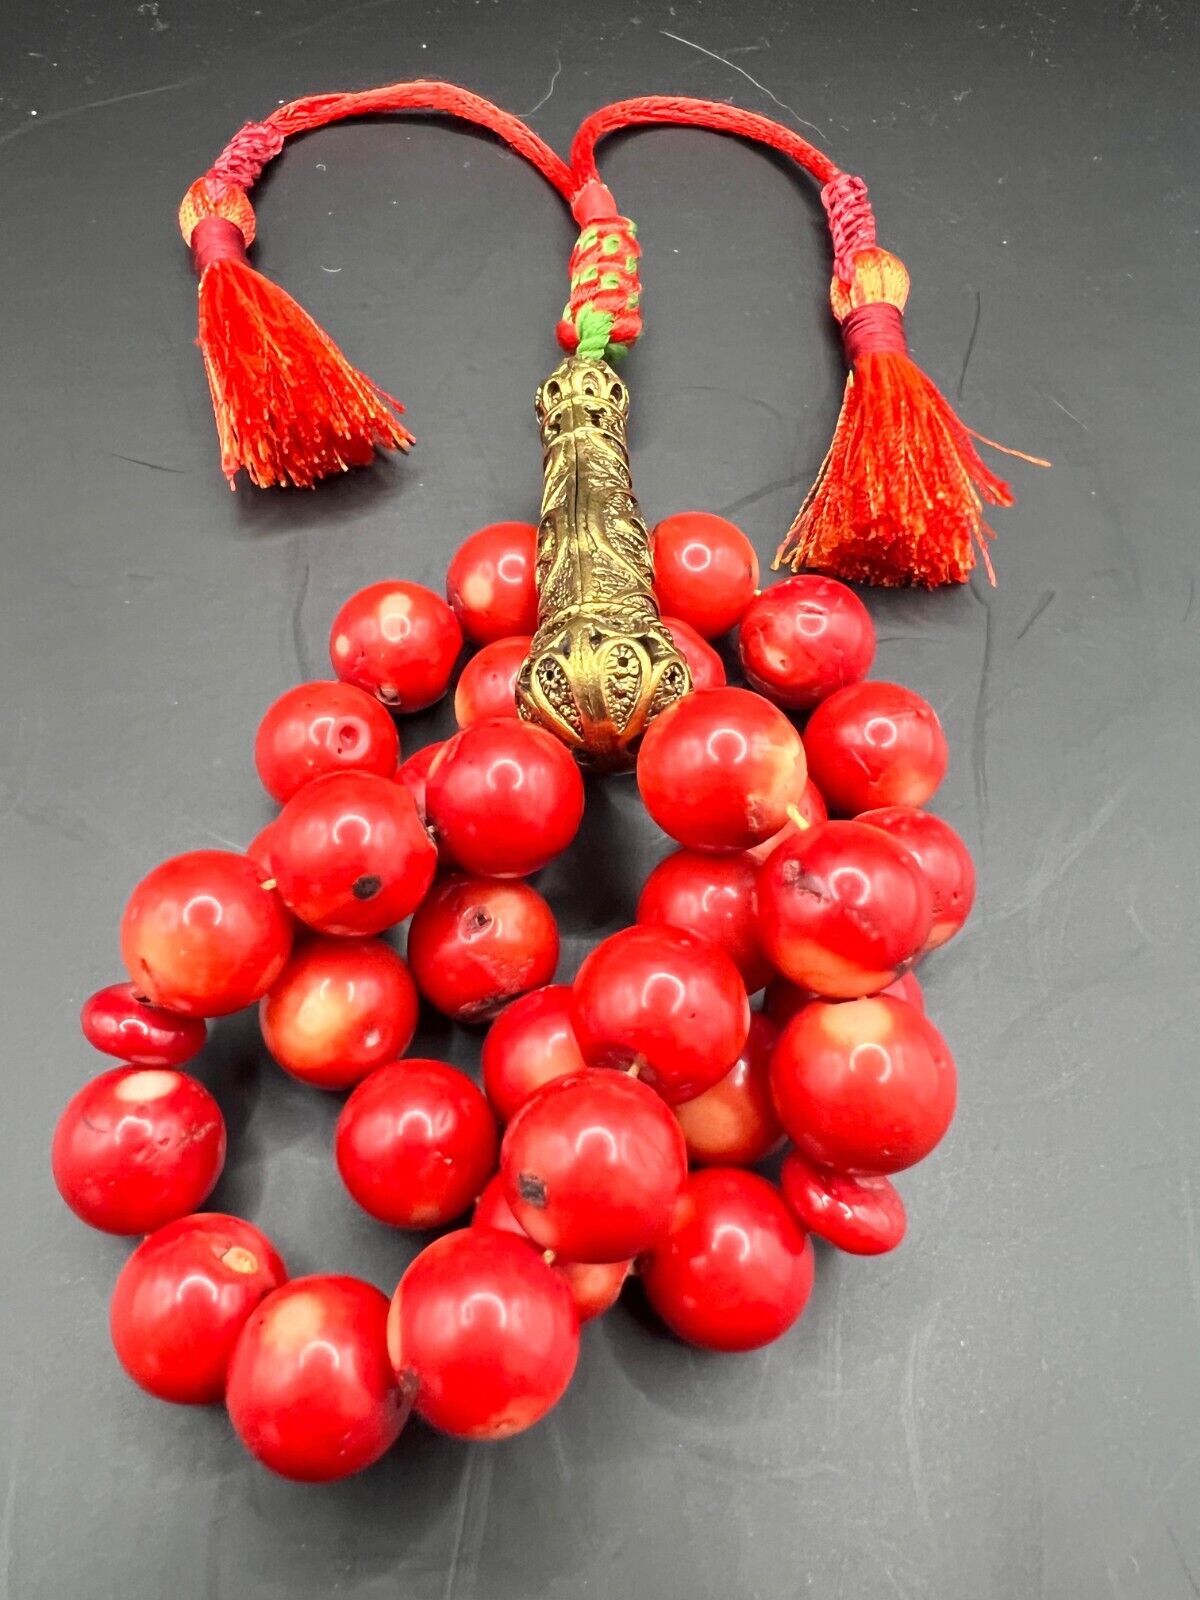 ANTIQUE GENUINE NATURAL RED CORAL ISLAMIC ROUND PRAYER BEADS 108 GRAMS 